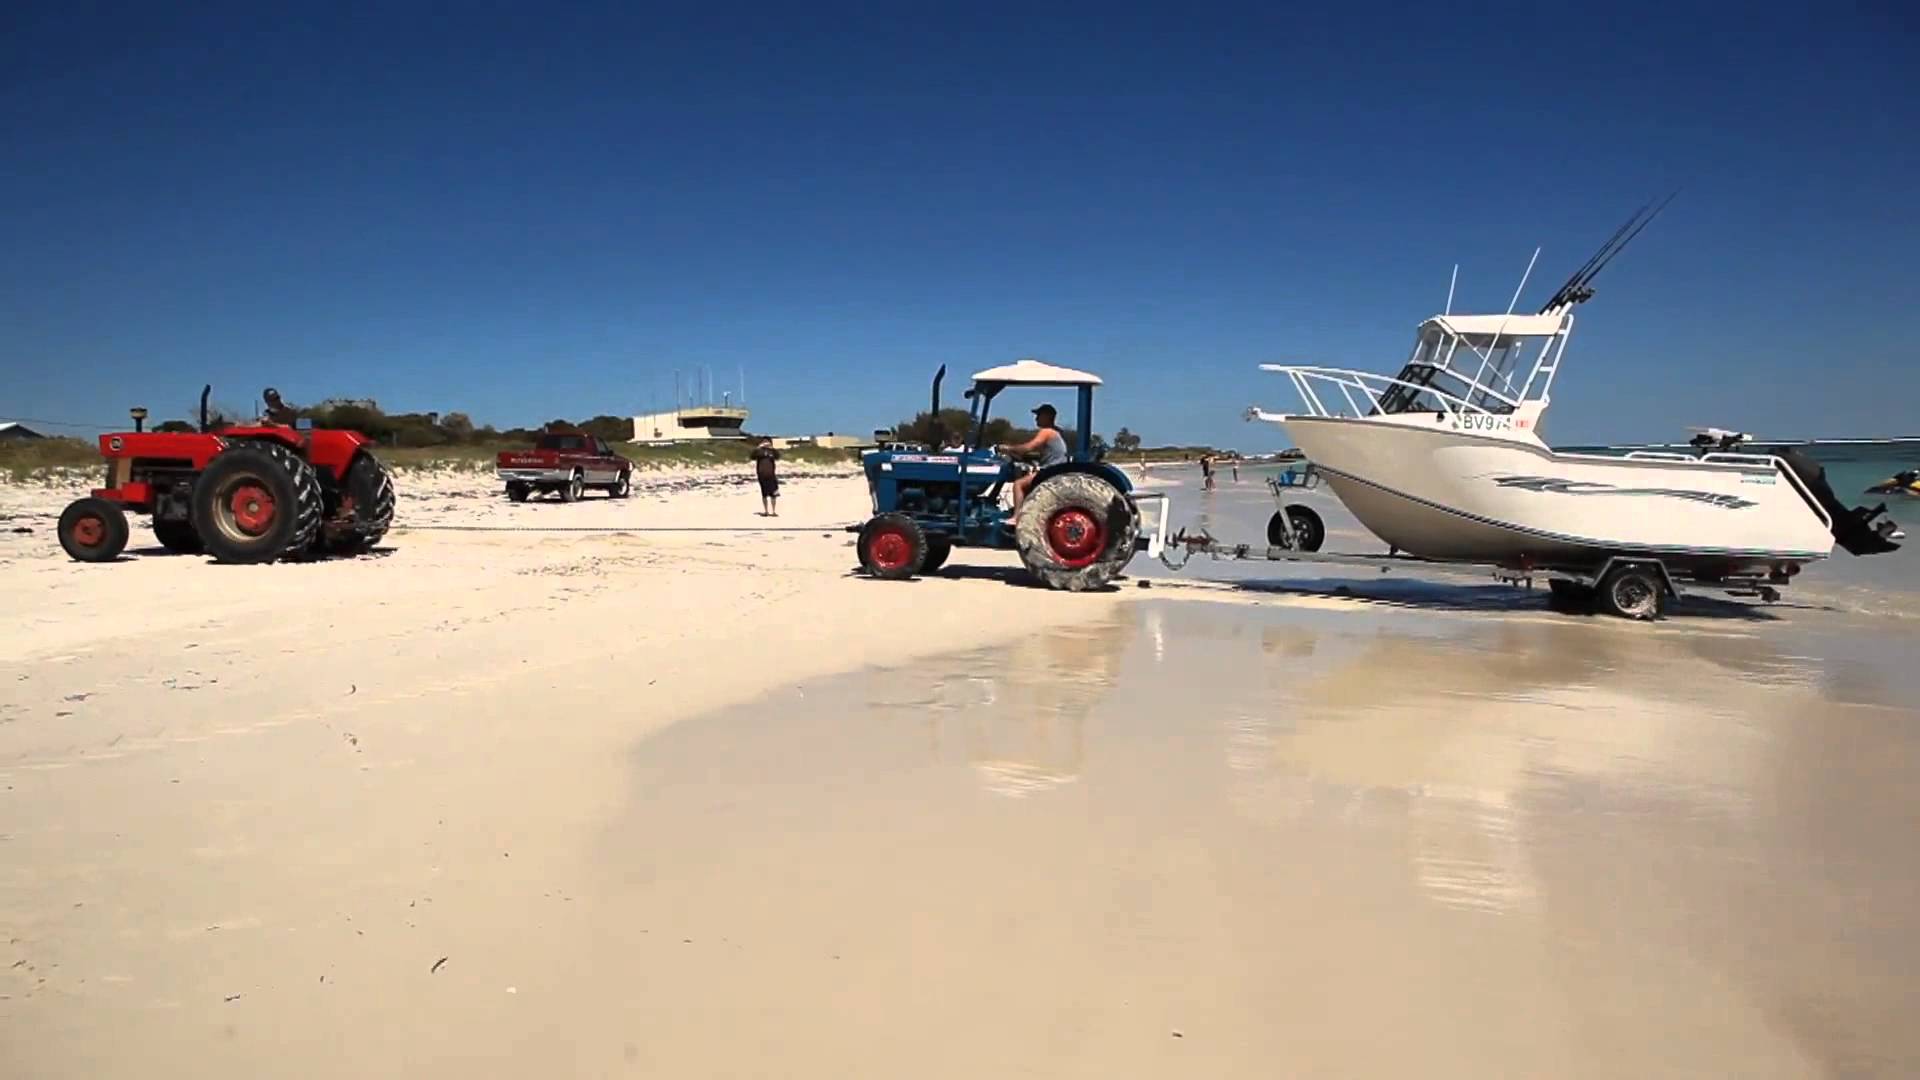 Lancelin tractor pulls bogged tractor from surf - YouTube